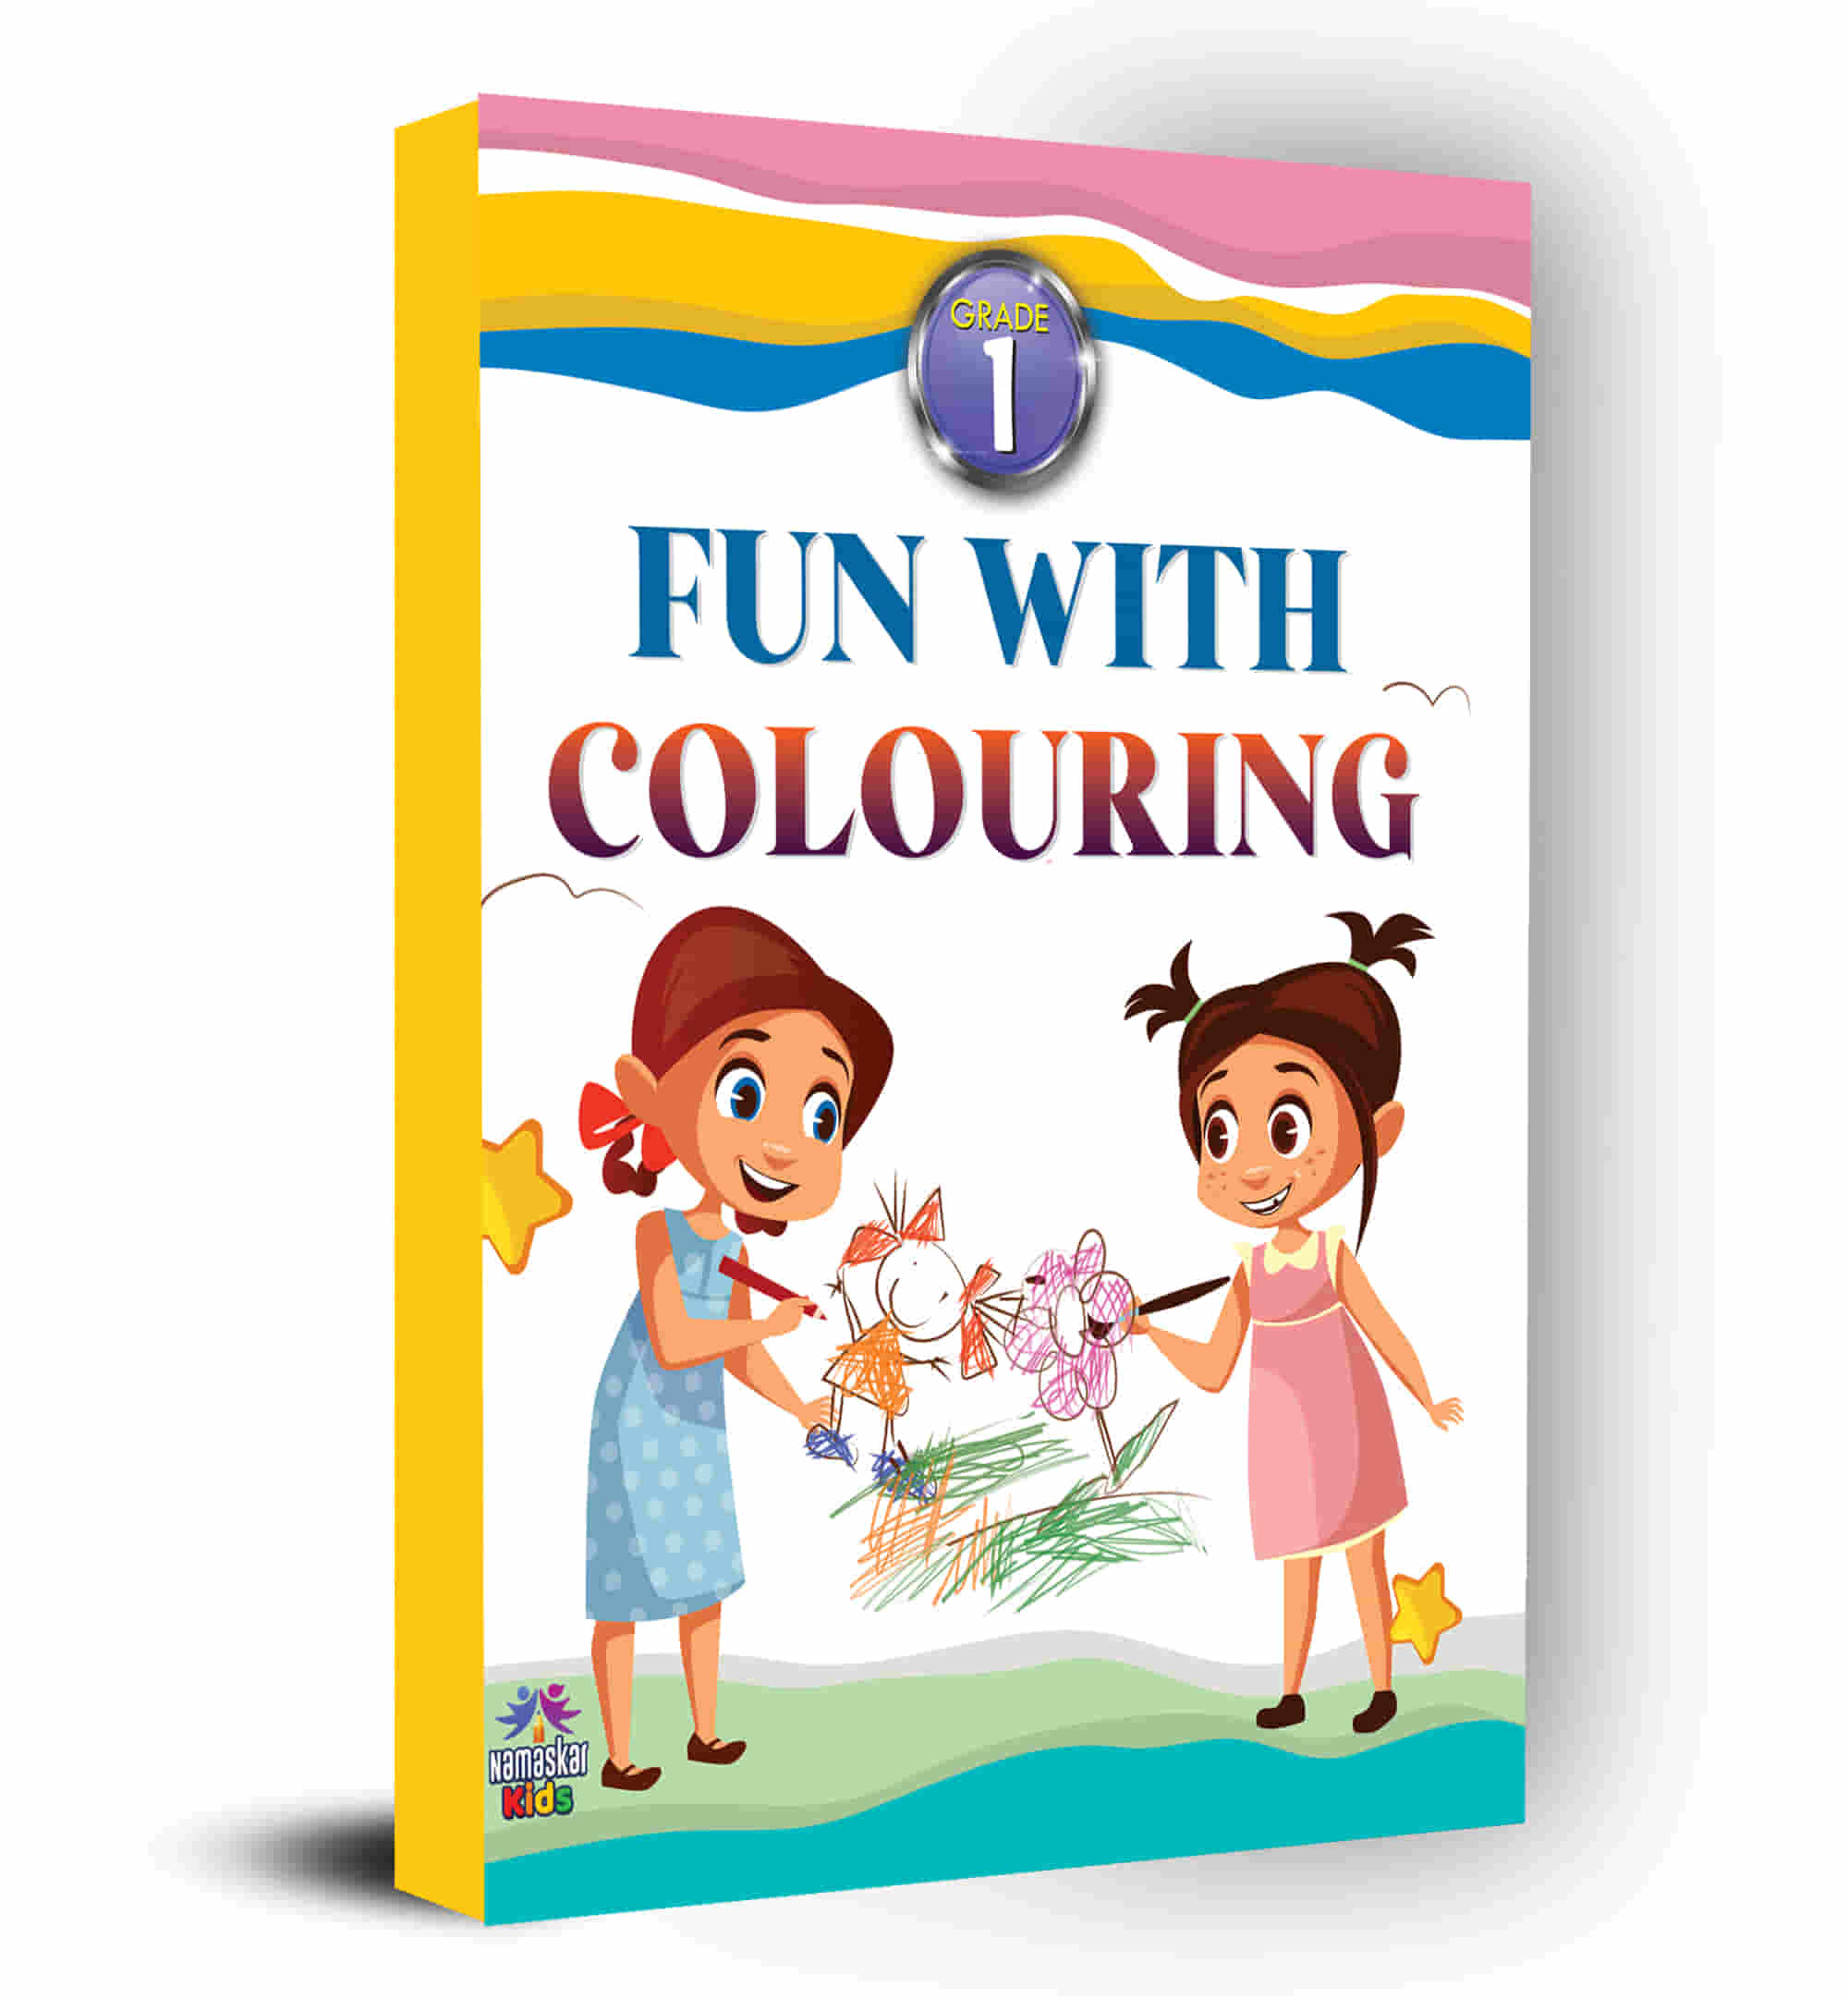 Fun With Colouring Children Drawing and Colouring Book for Kids Age 1 - 6 Years